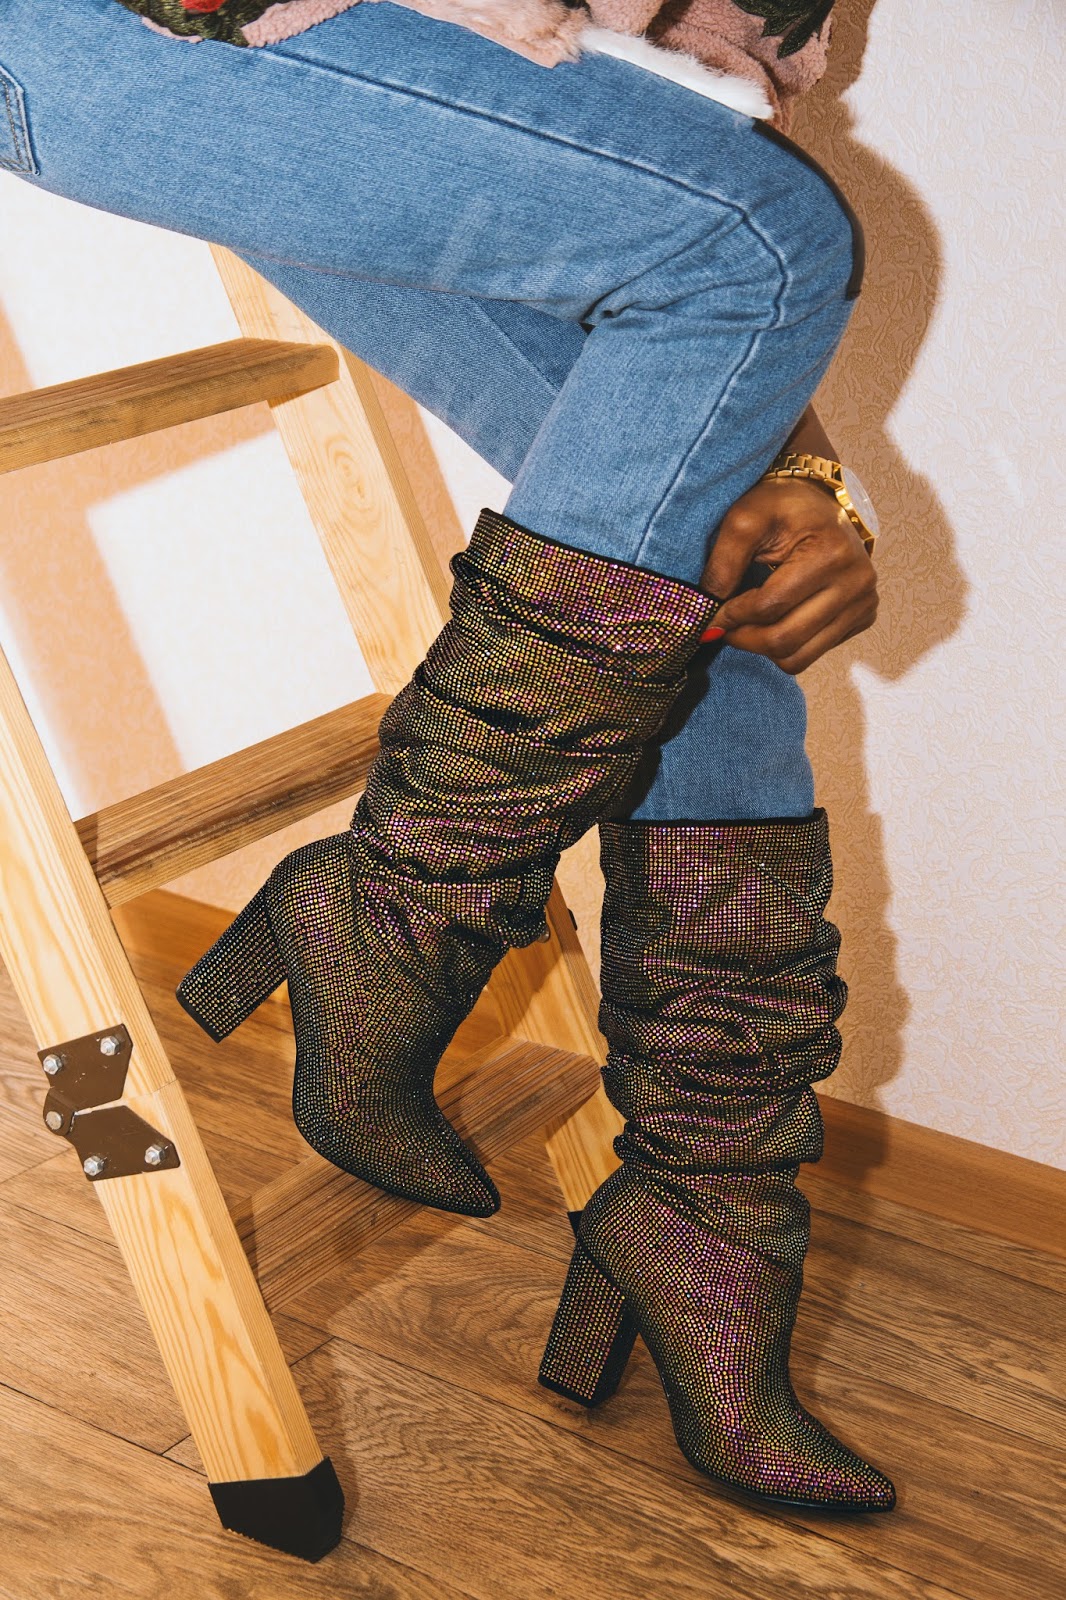 Slouchy Sparkly Chunky Knee High Boots